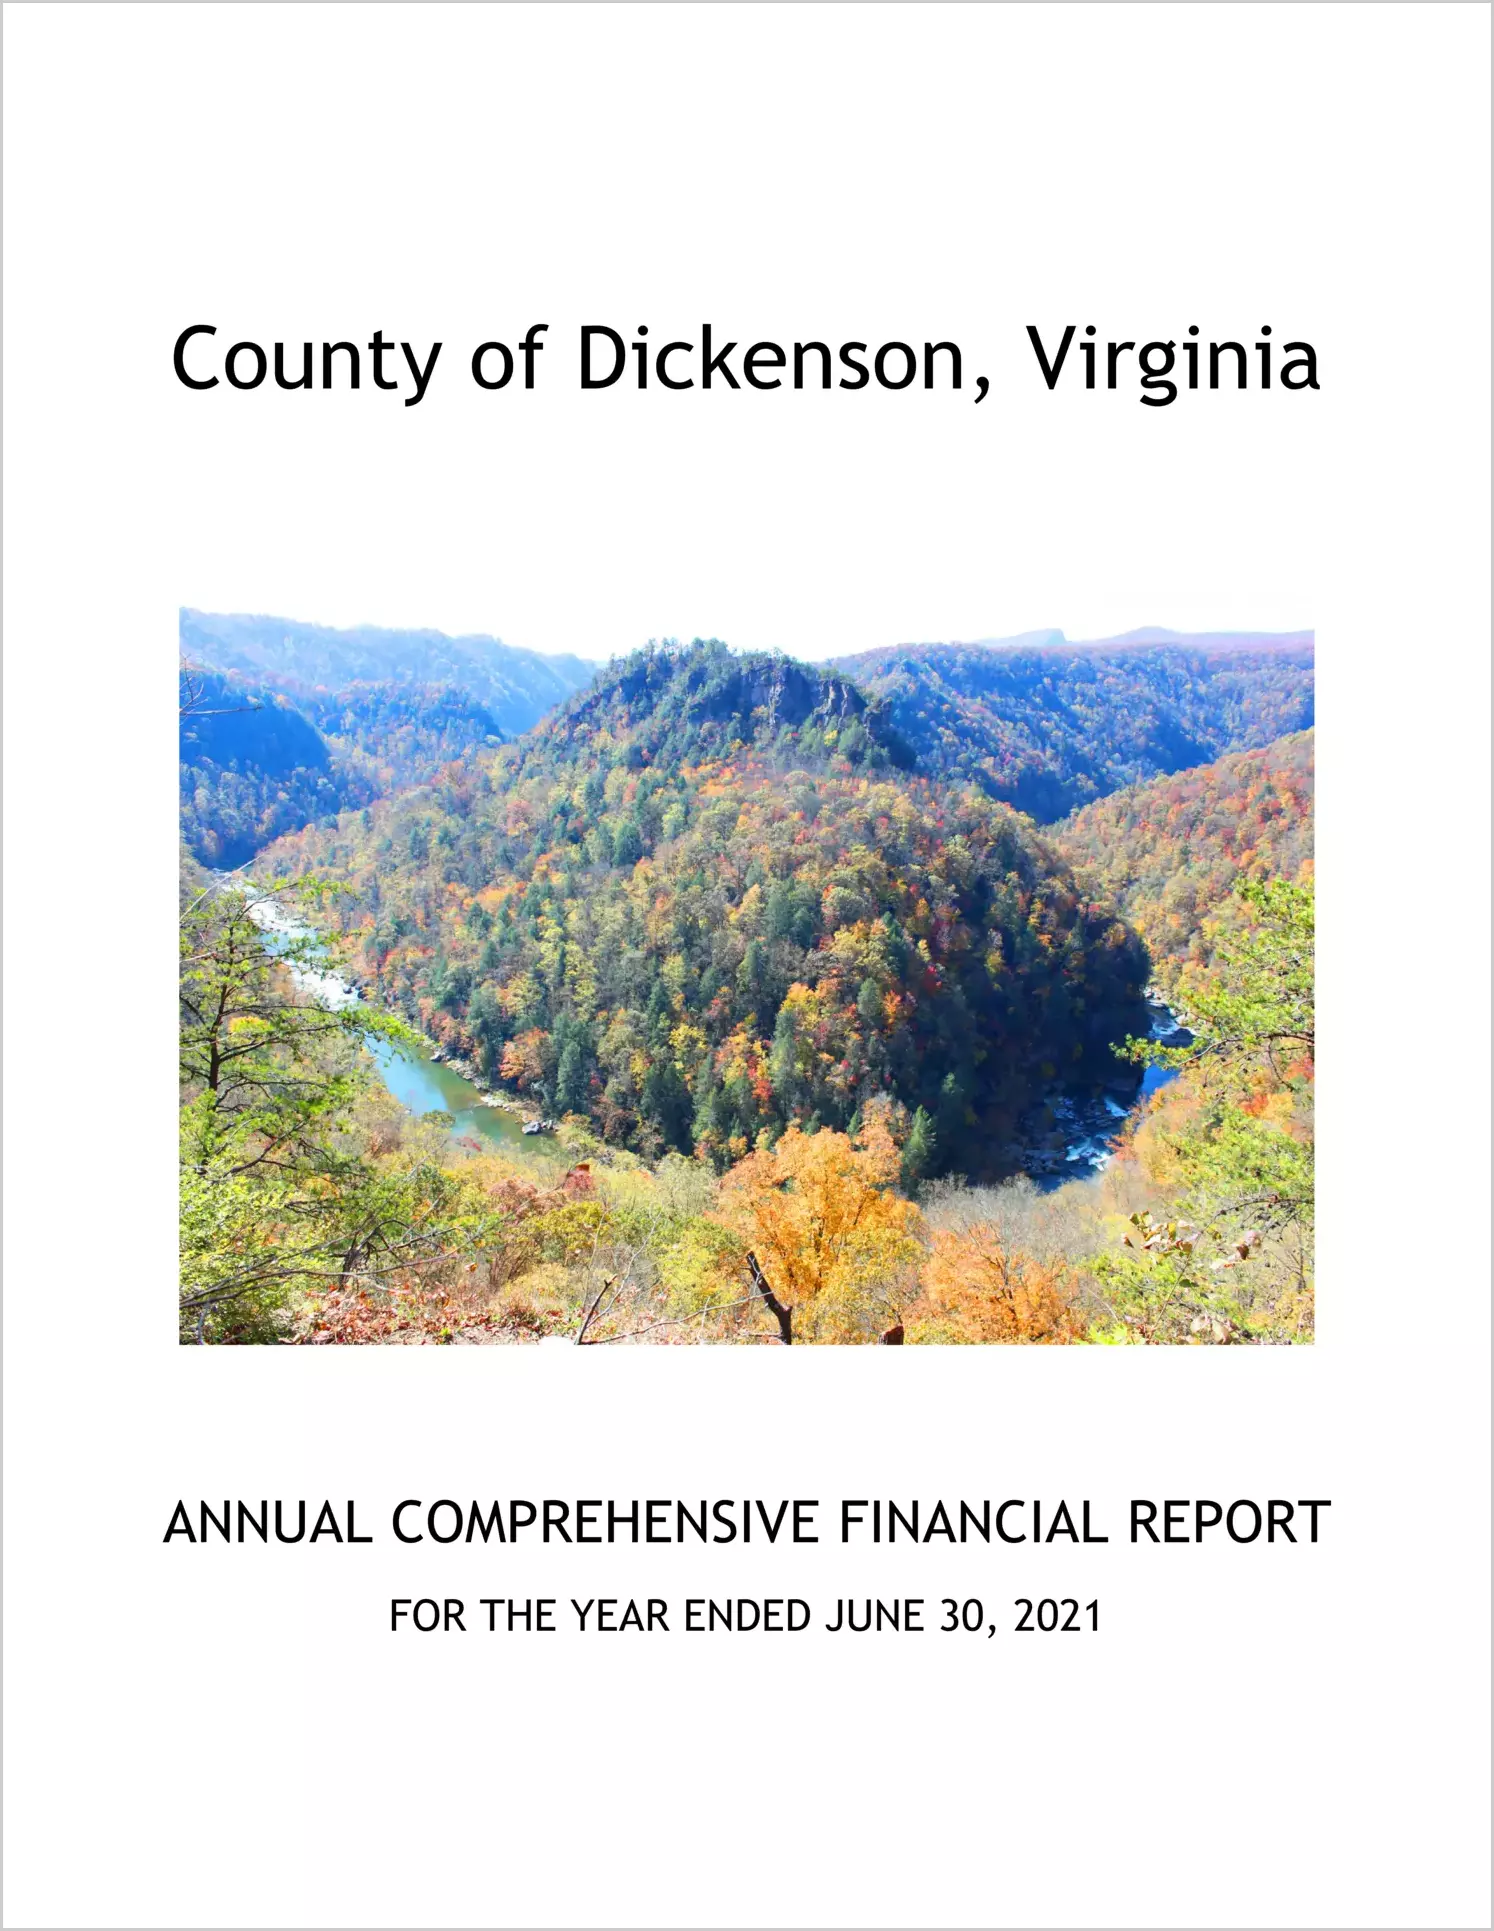 2021 Annual Financial Report for County of Dickenson